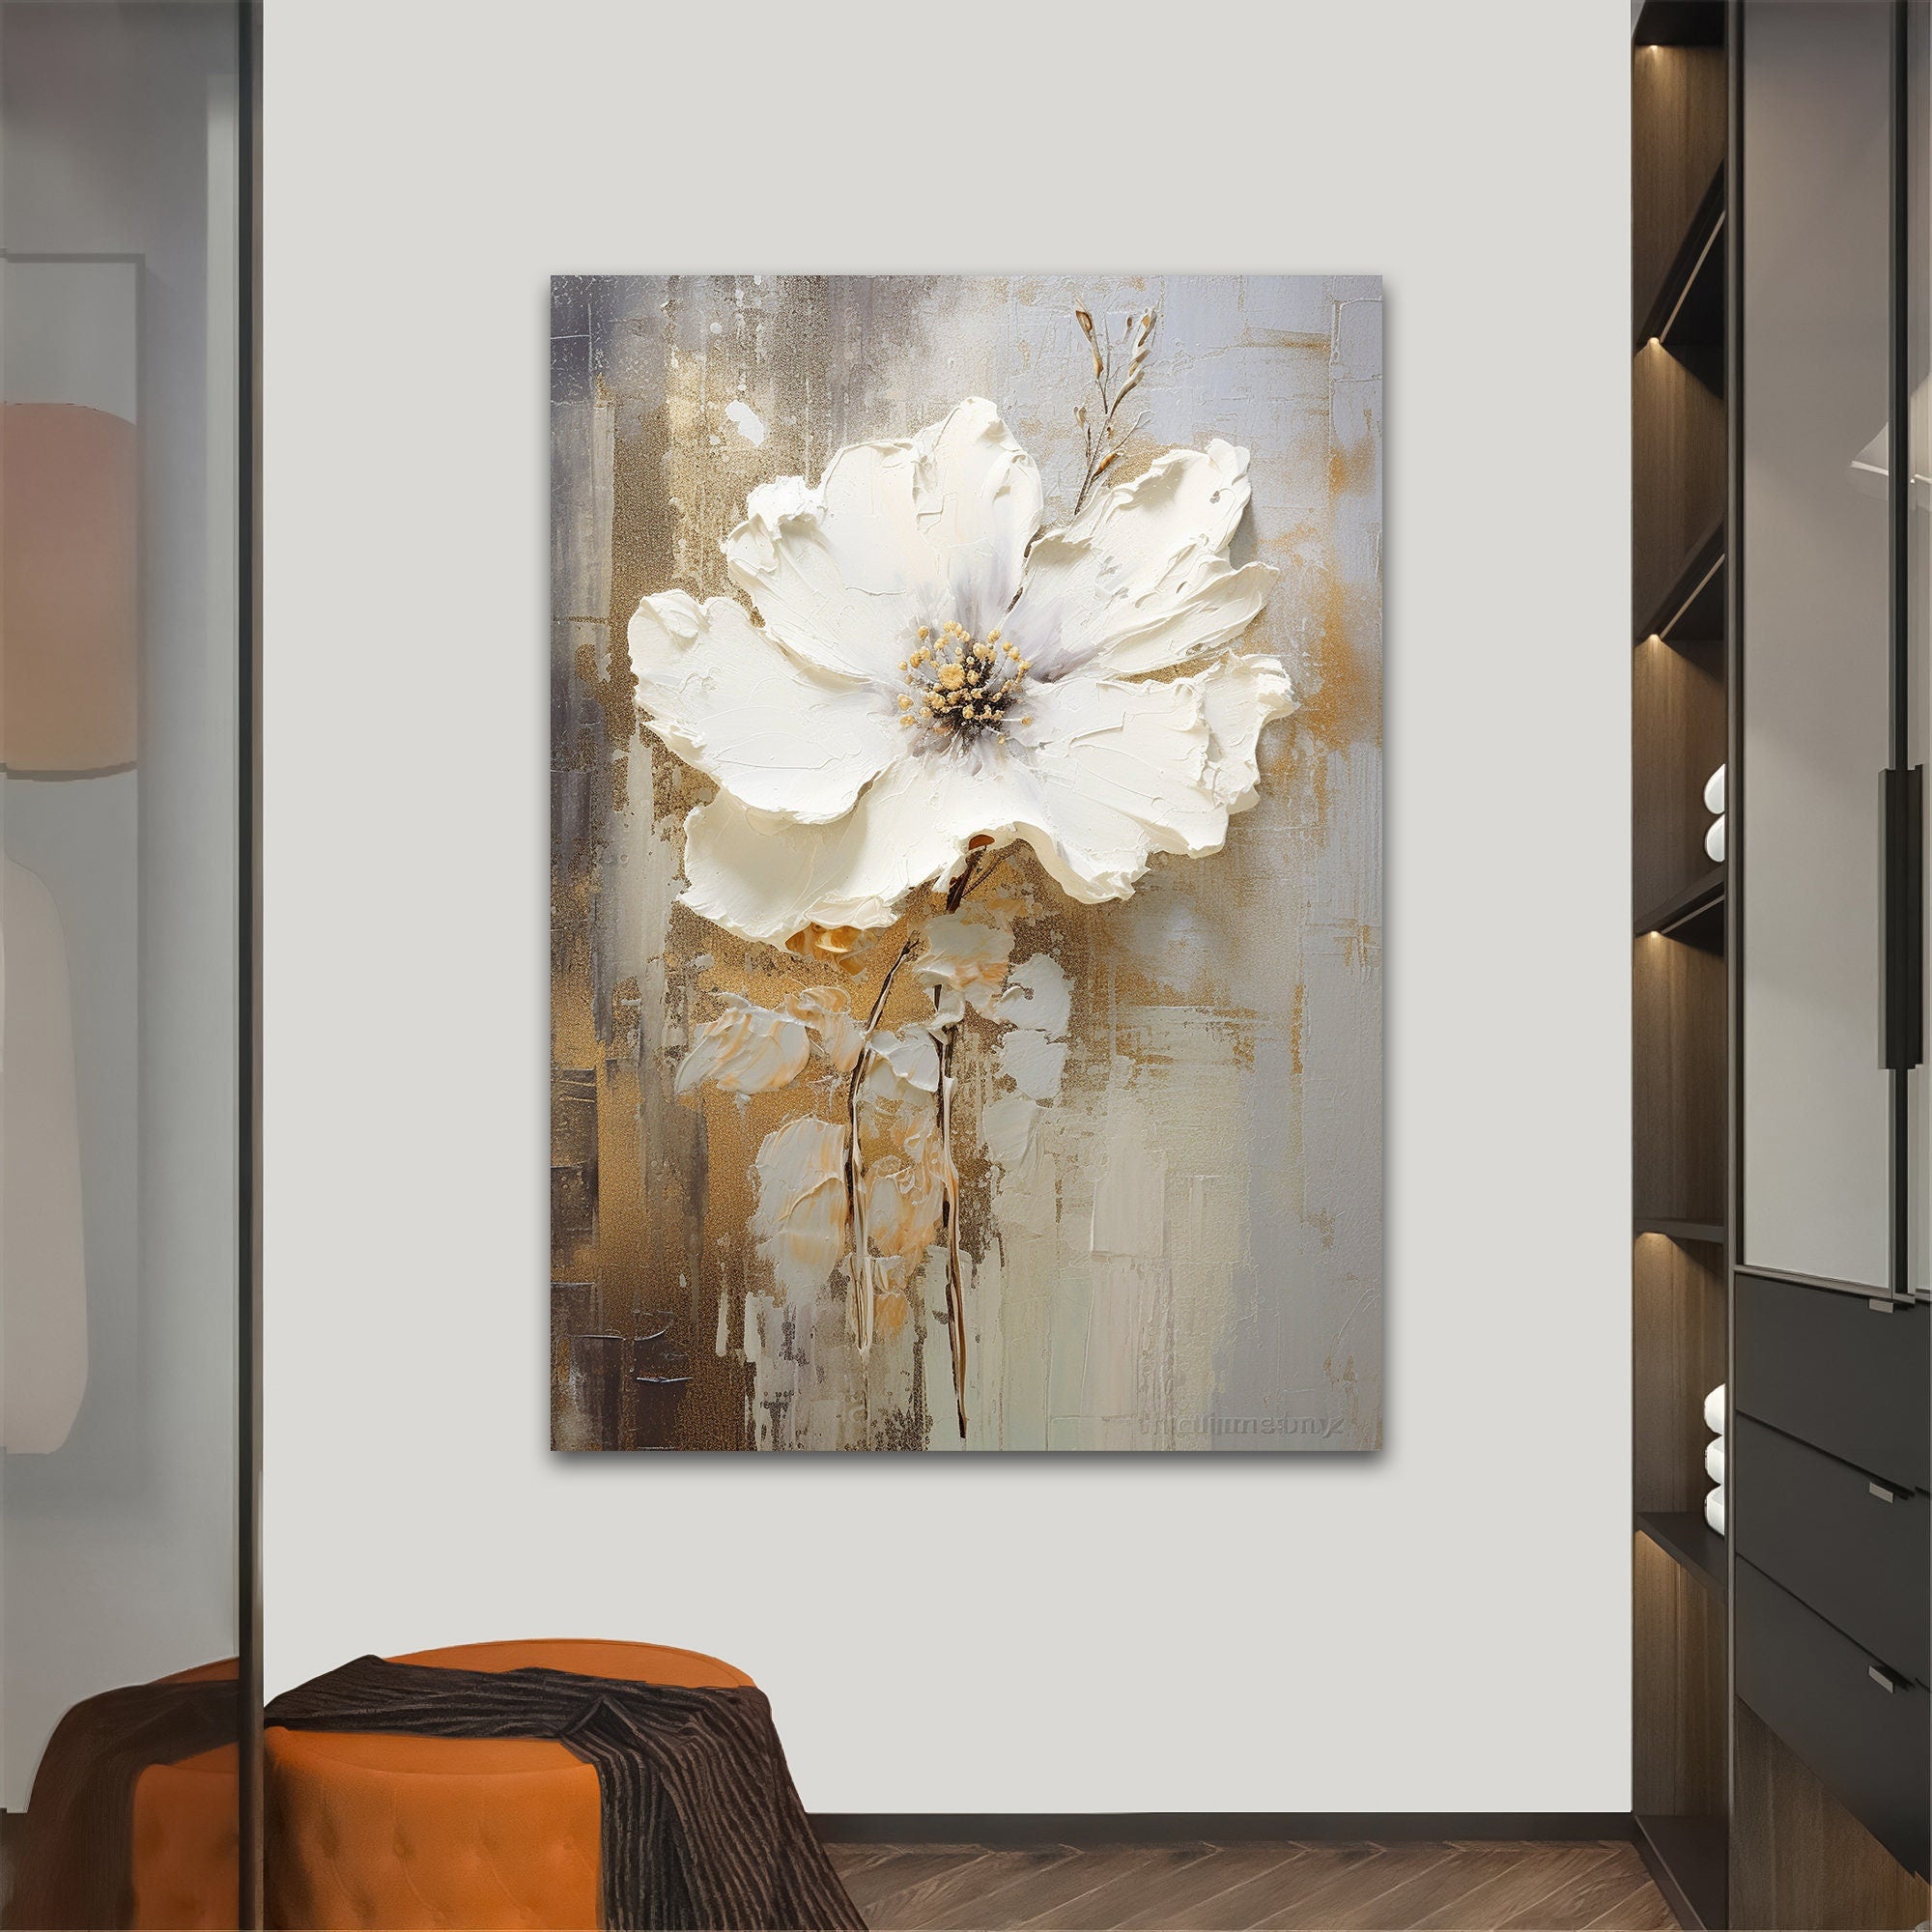 Flowers painting canvas wall art, Flower for living room wall decor, White Flower wall decor, Flowers canvas print art,